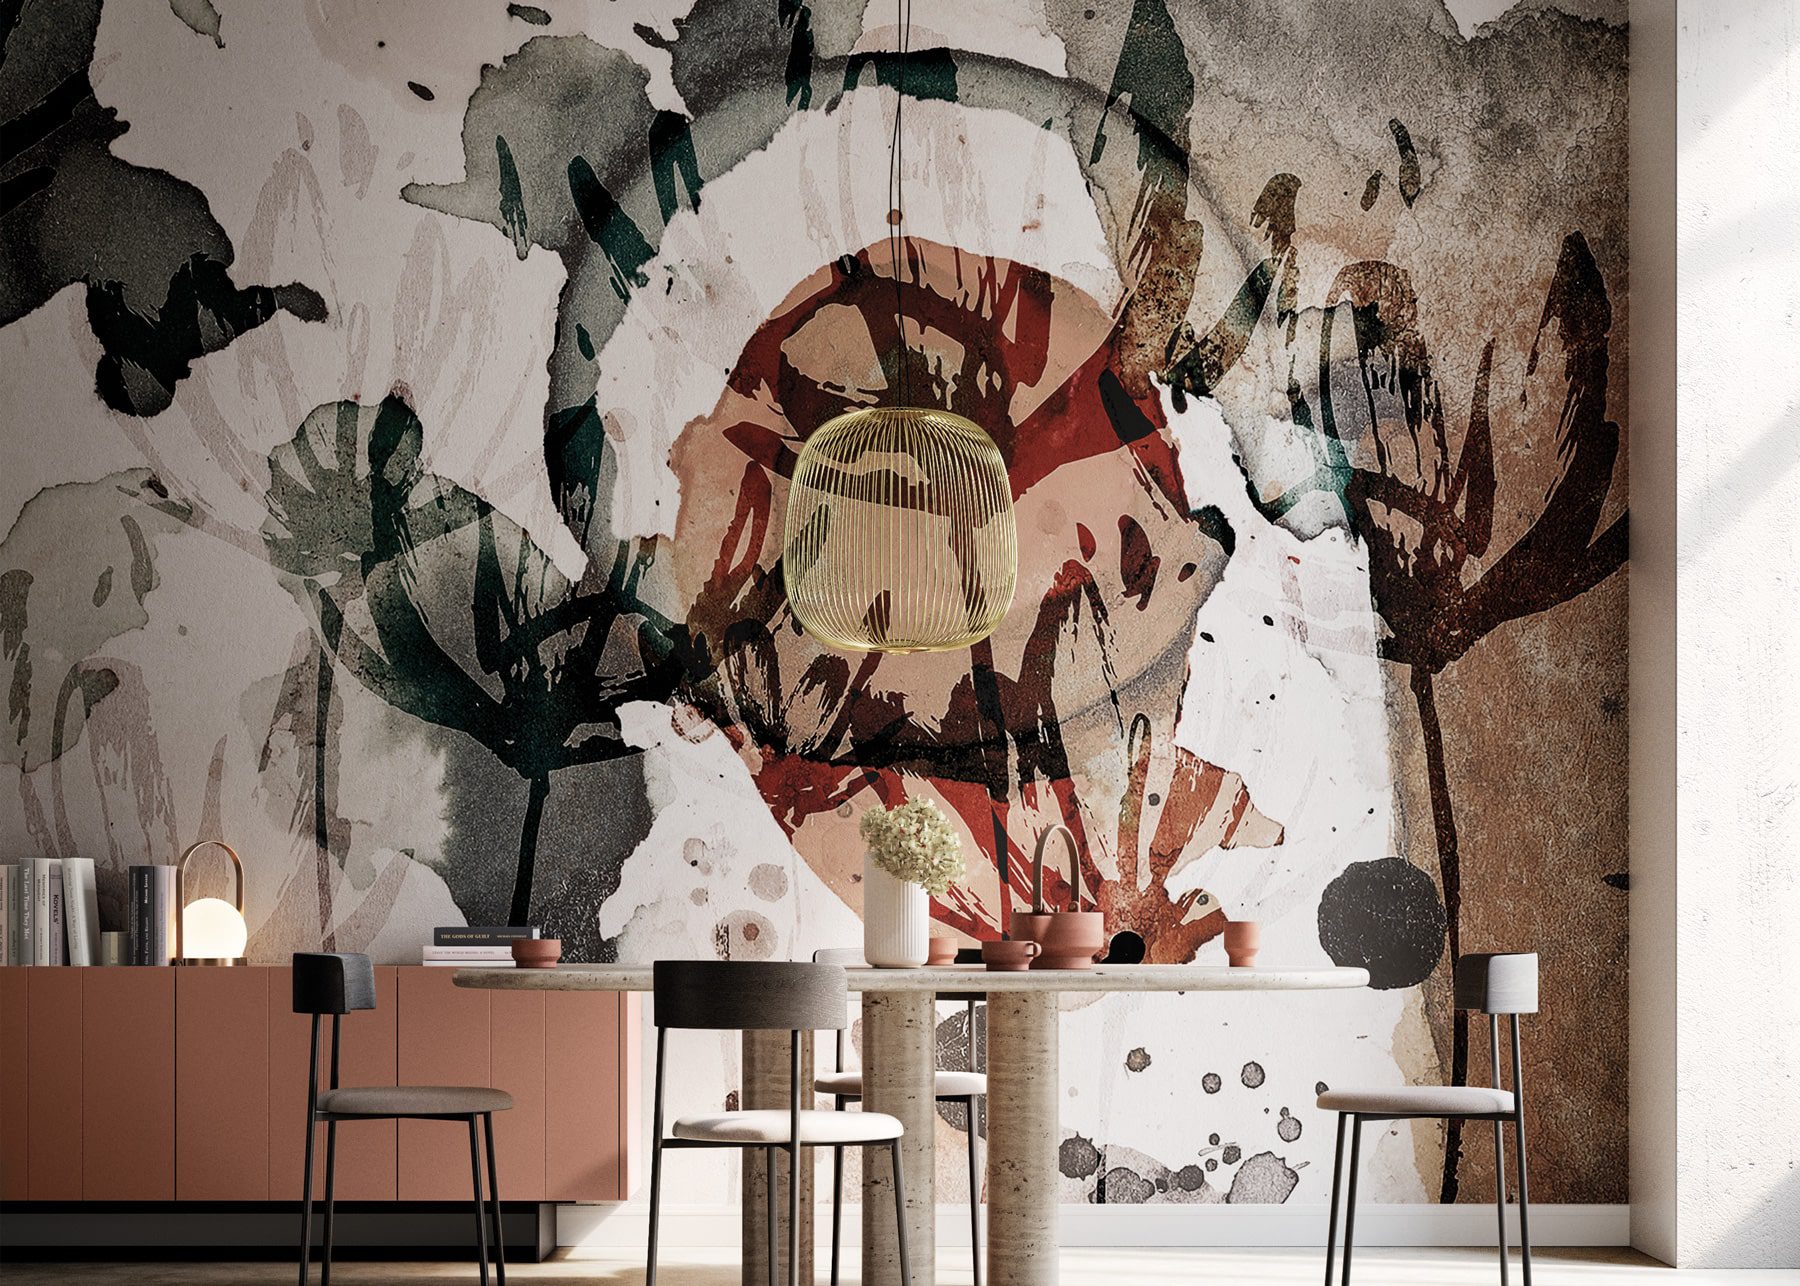 The Instabilelab Design Wallpaper revolution with style, luxury and elegance the interior design. Discover the refined collections.